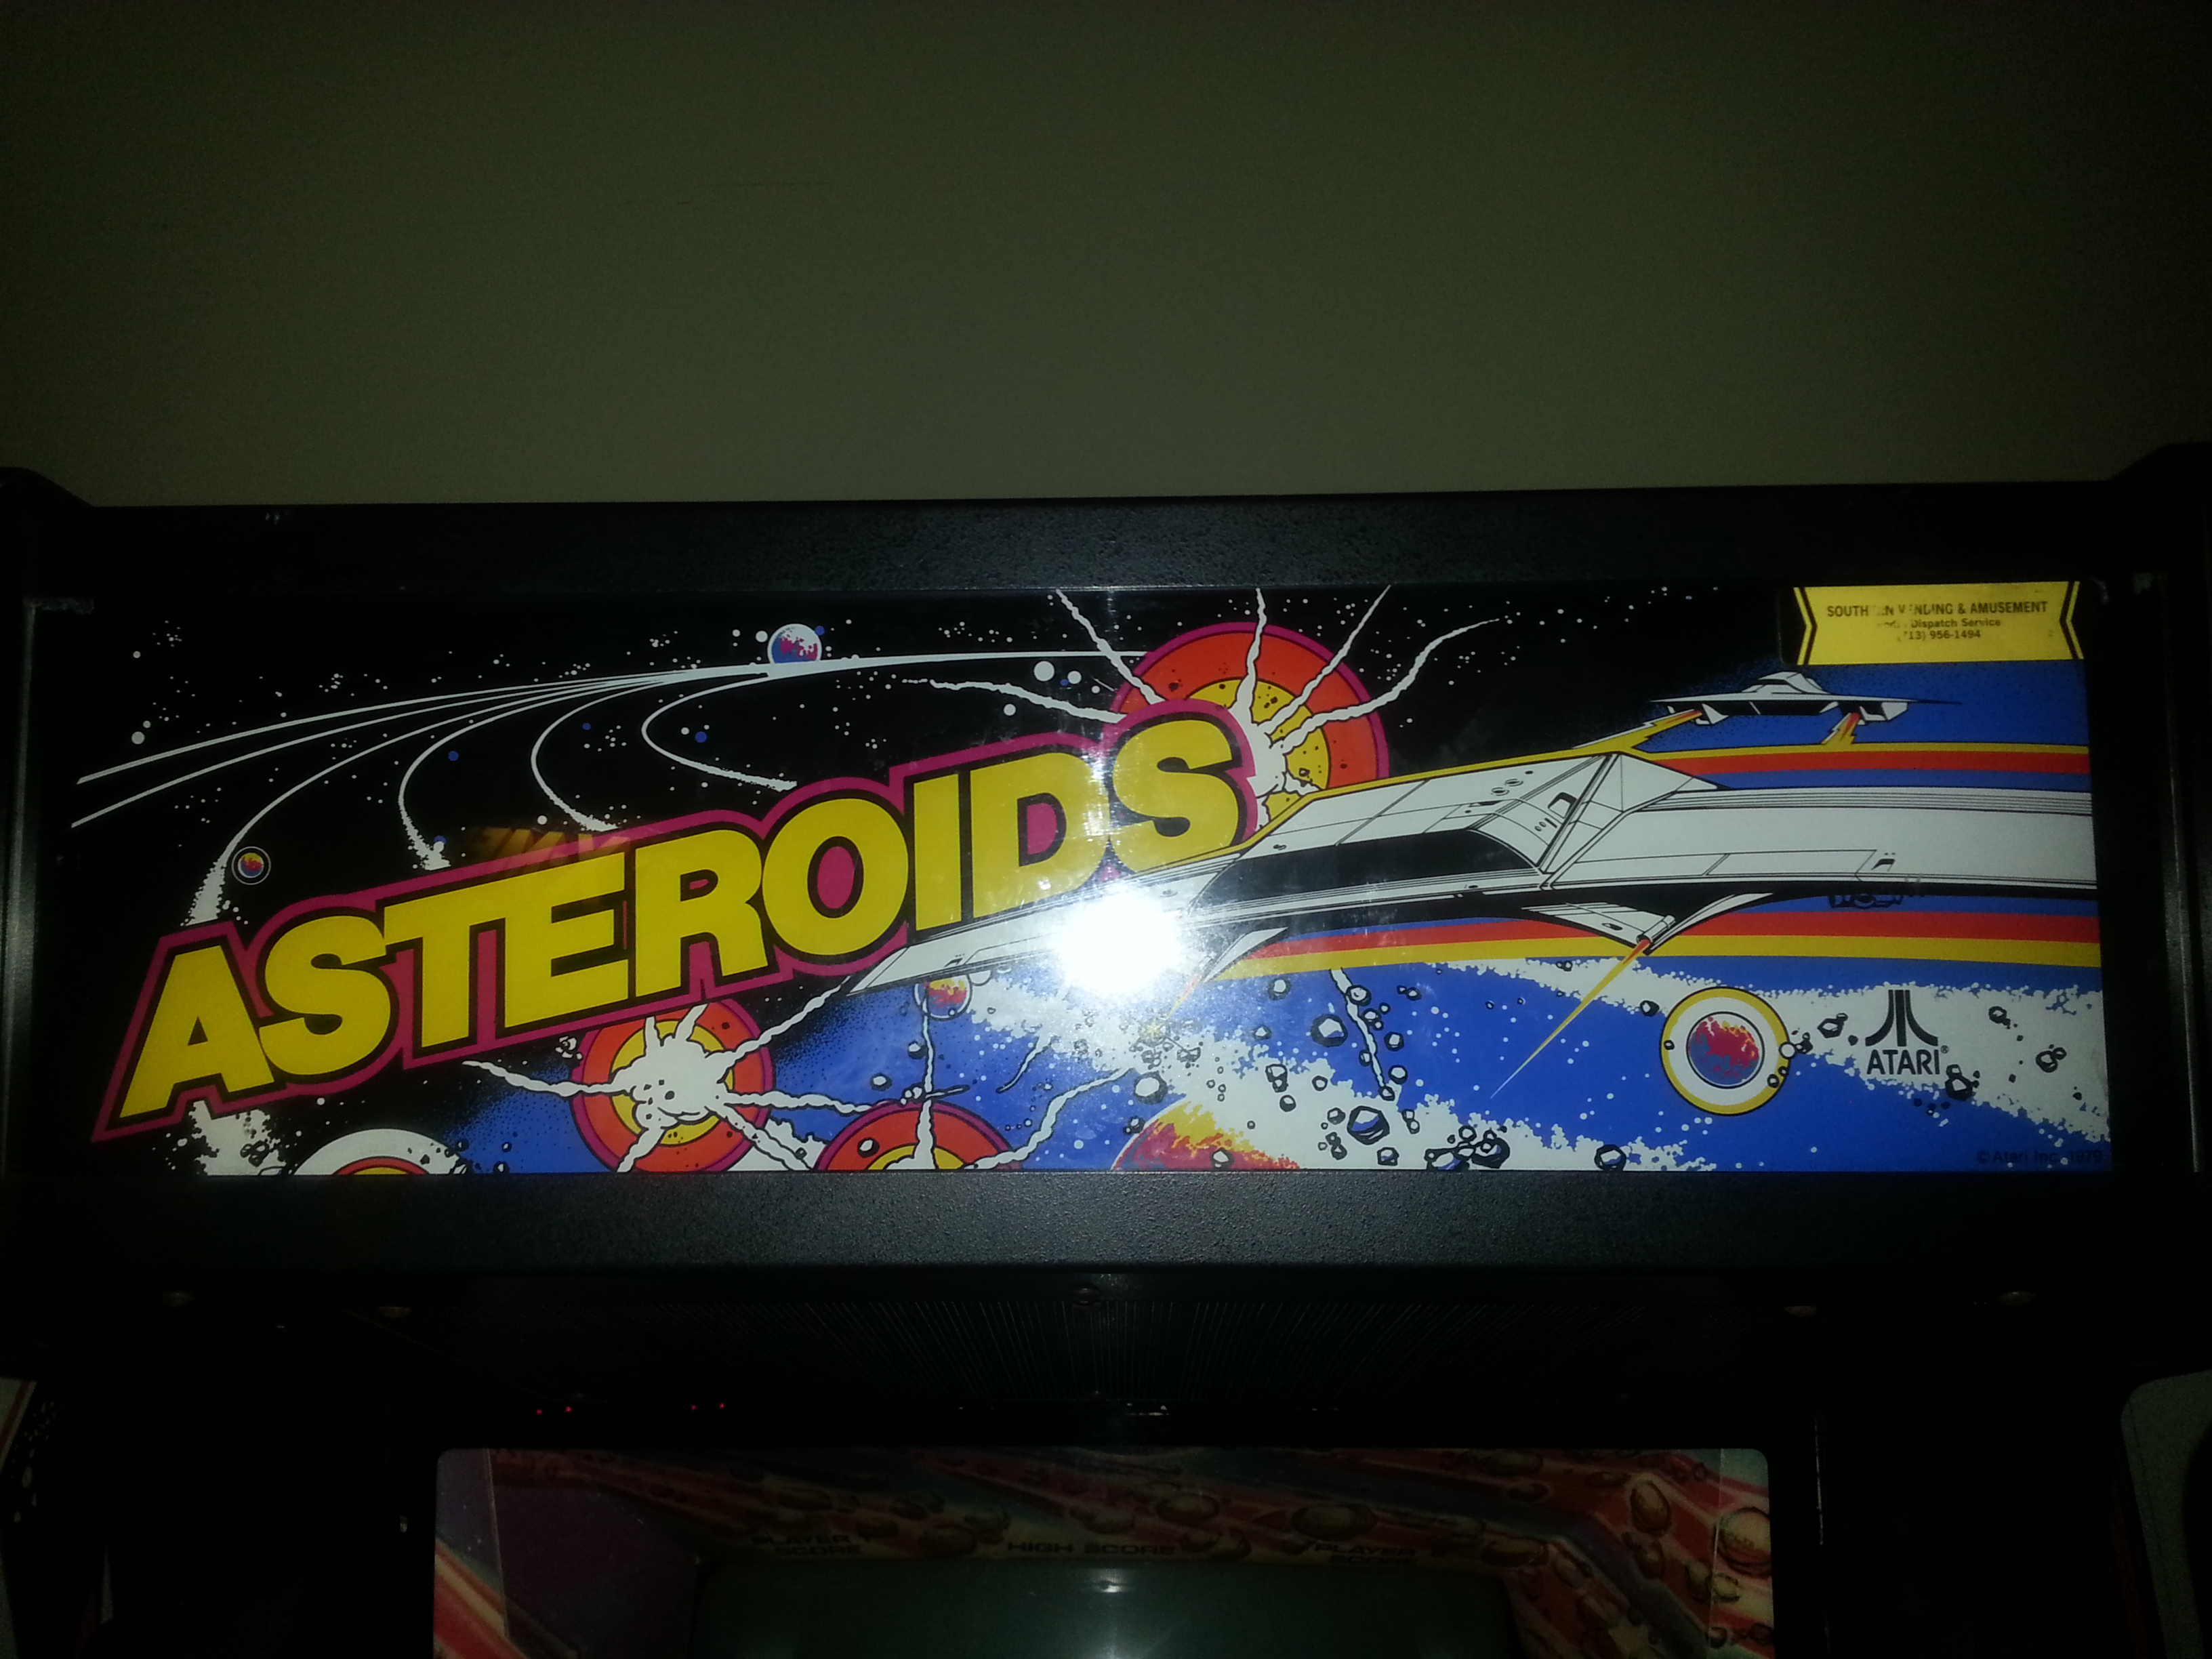 Asteroids 10,460 points